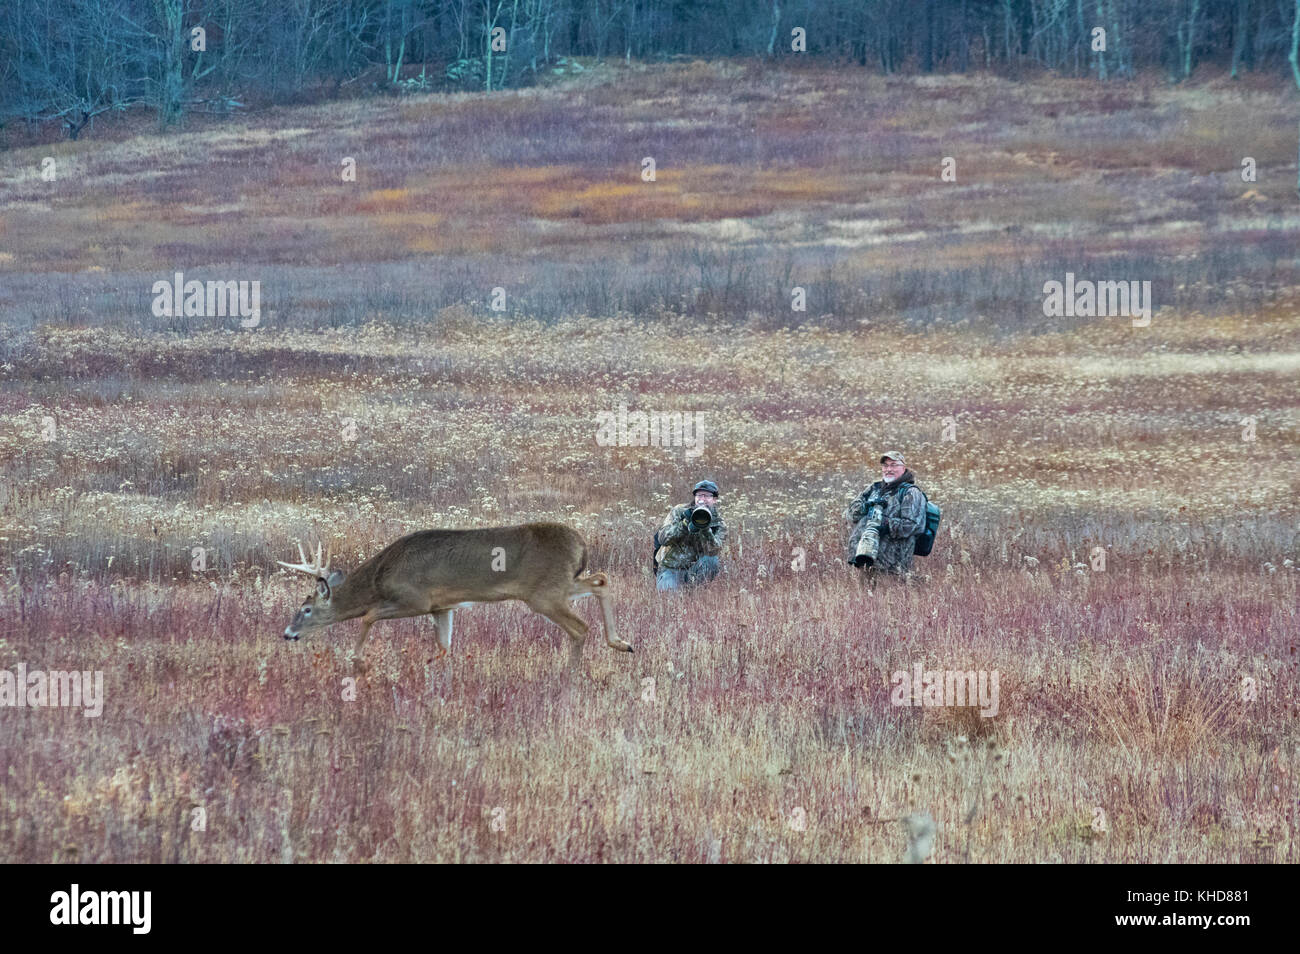 Two photographers sit low in the field of Big Meadows as they take pictures of a large buck walking near them during the rut season at Shenadoah NP. Stock Photo